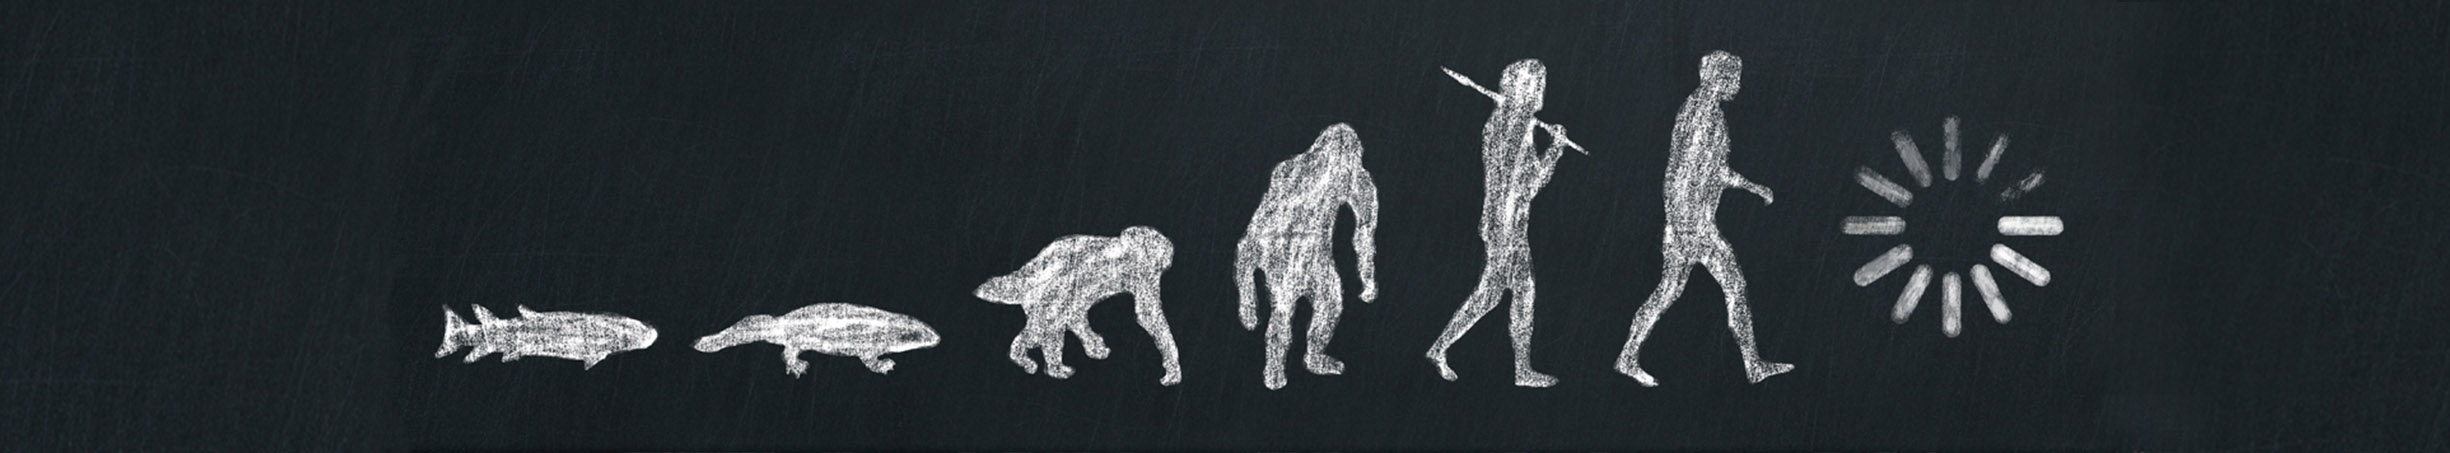 A chalkboard drawing of Darwins evolution of man used to show the parrallels between human evolution and the evolution of the alarm monitoring business from casual to a professional alarm monitoring service industry